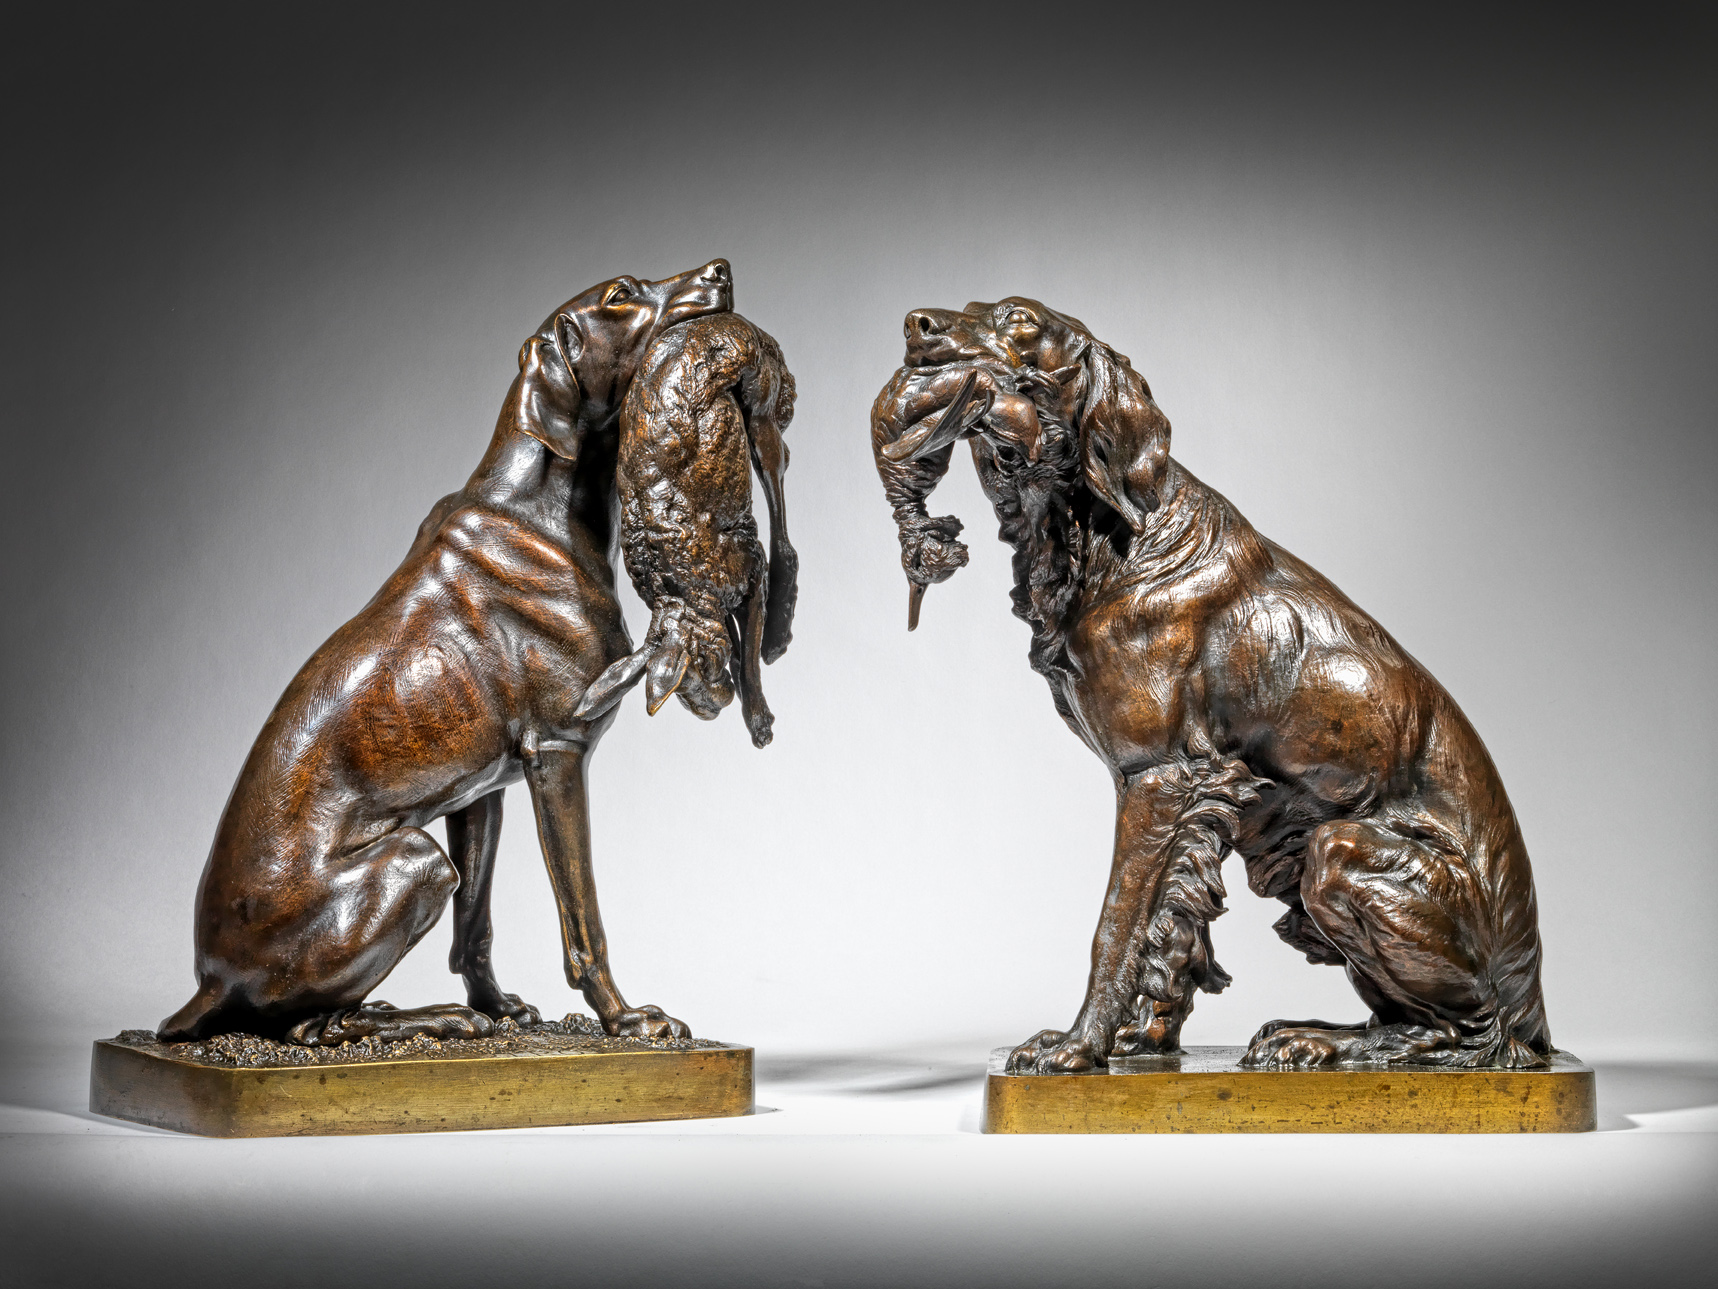 Pointer and Setter with Game, Medium version, c.1860